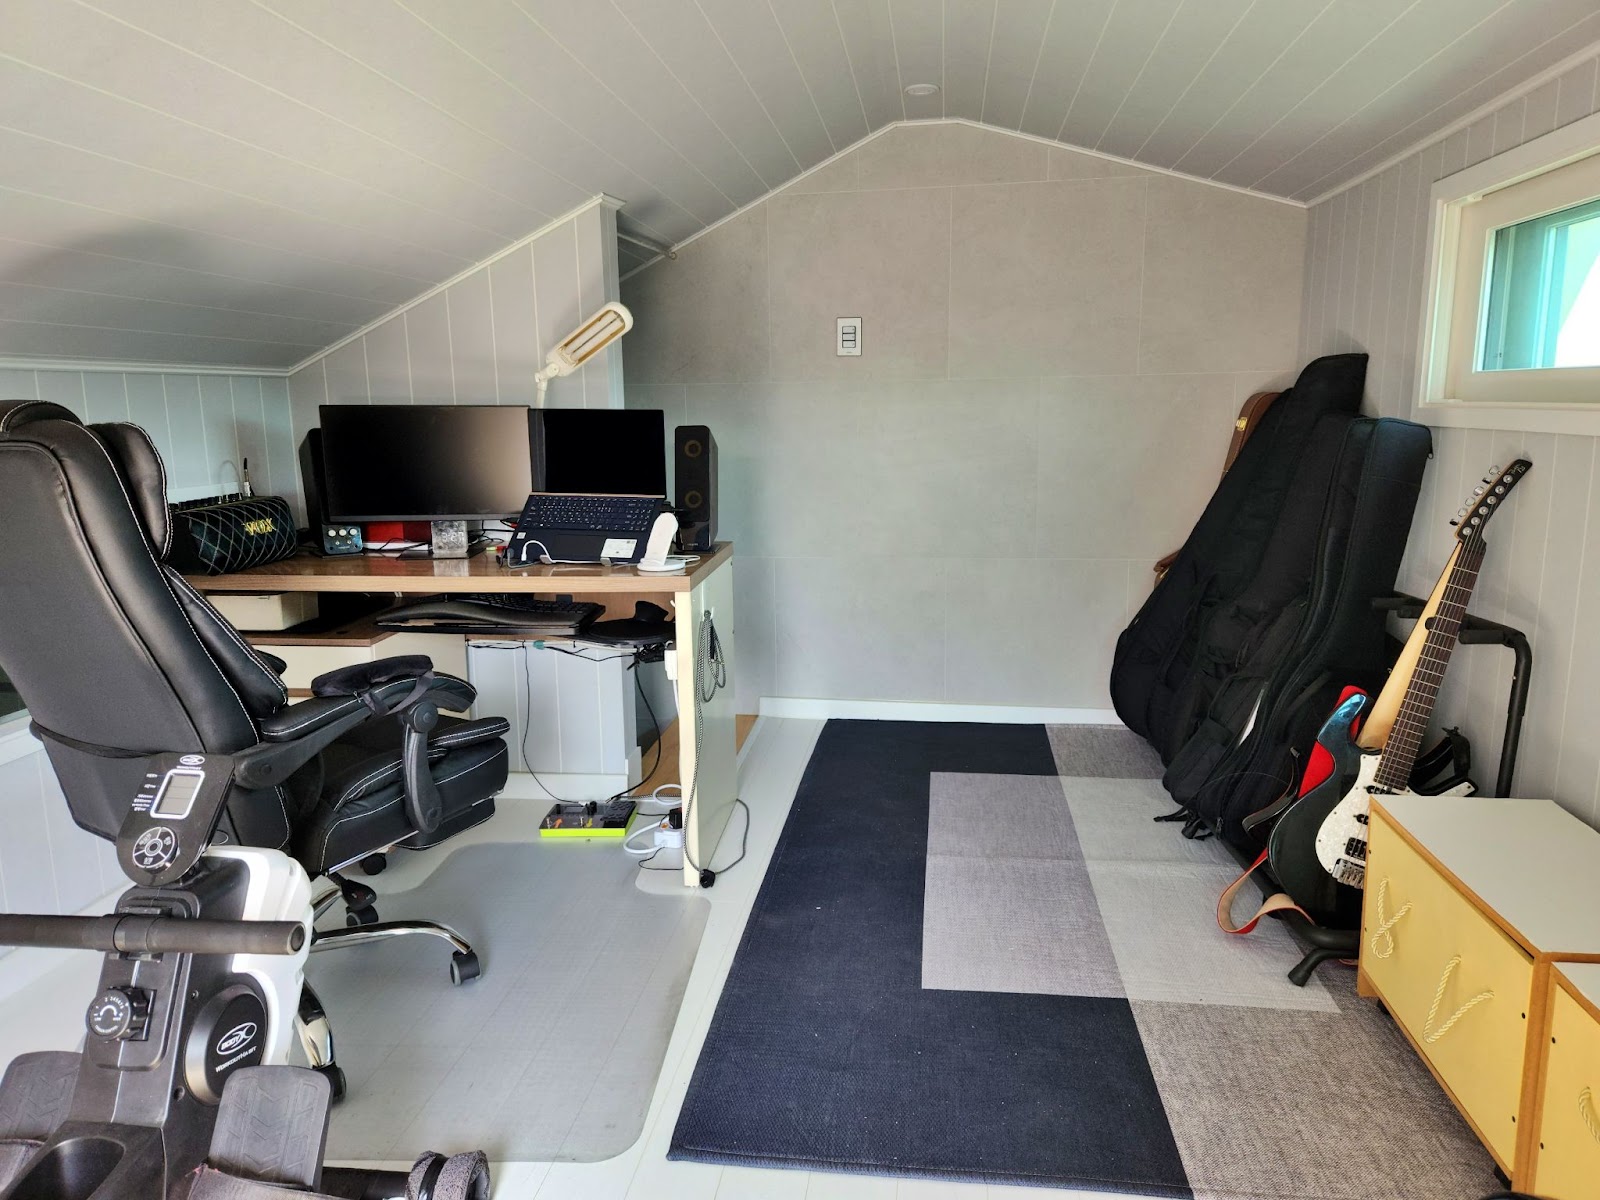 My loft office with several guitars on the right and a desk with a laptop and a second monitor on the left.